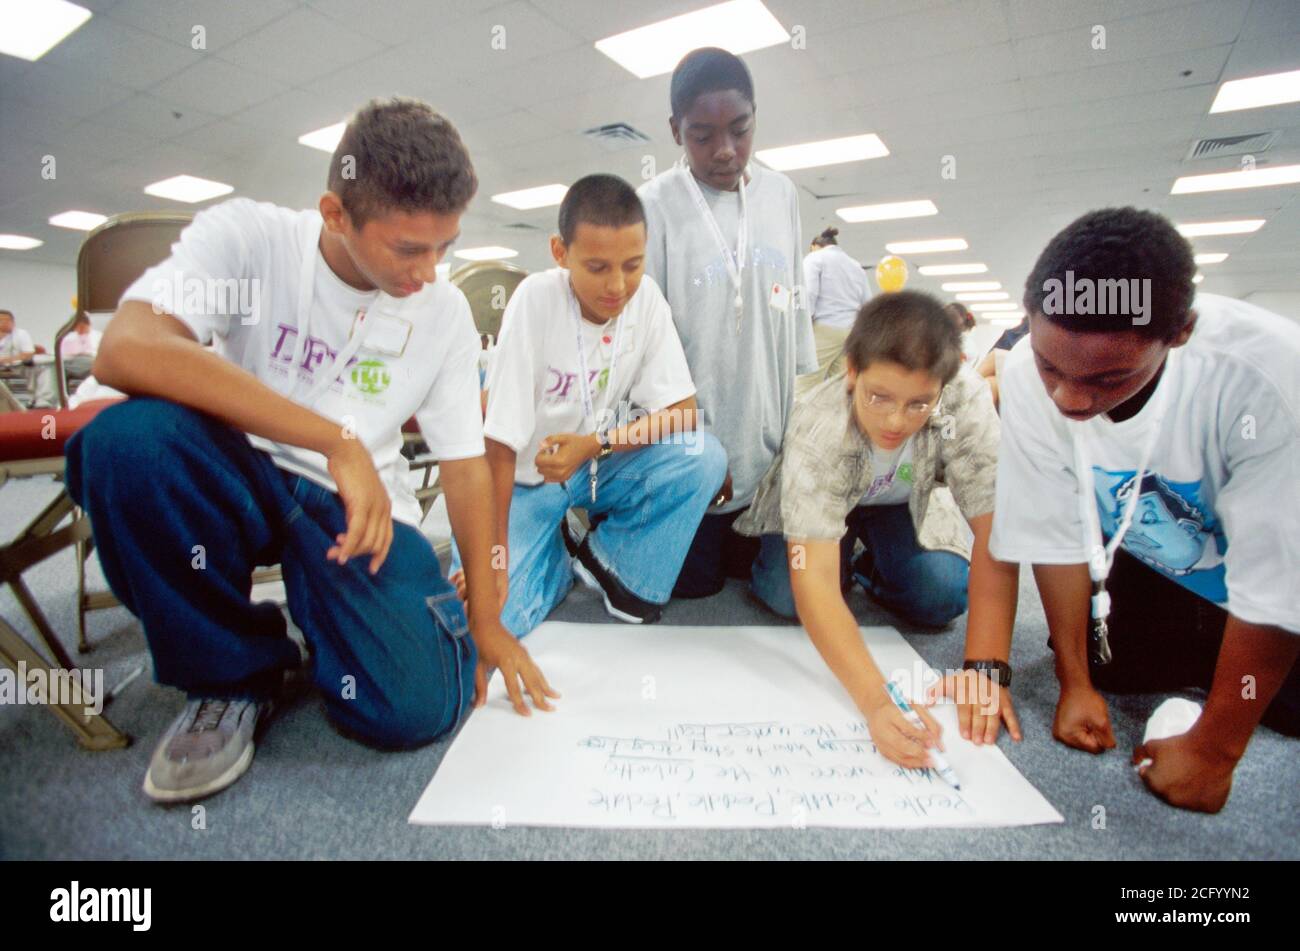 Miami Florida,youth club student students addiction abuse prevention organization,anti addiction workshop workshops teamwork working together,making m Stock Photo